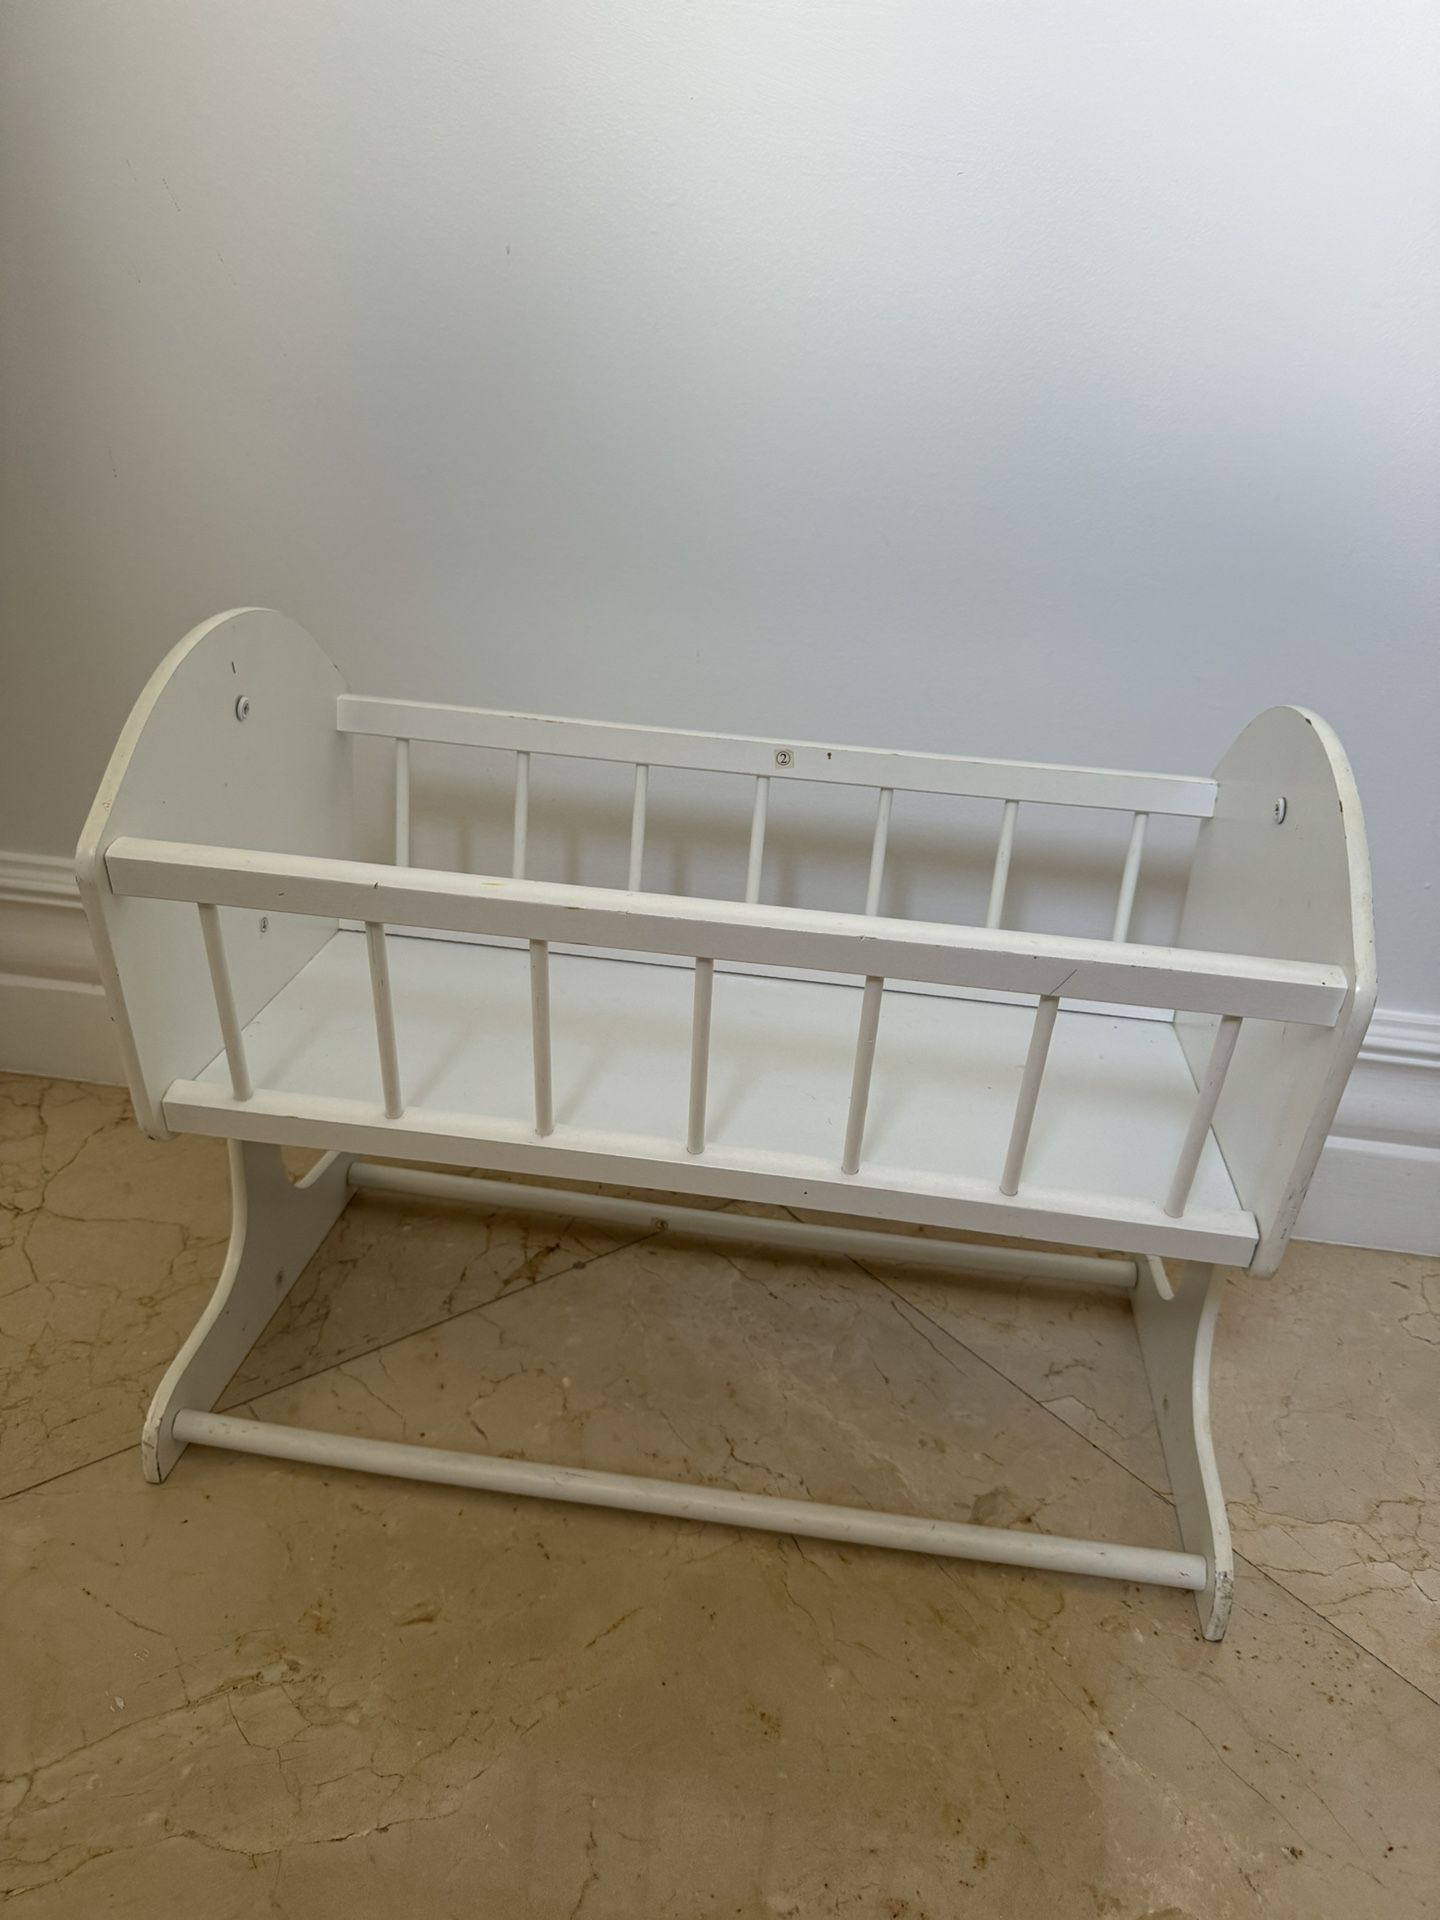 Wooden Play Cradle For Dolls